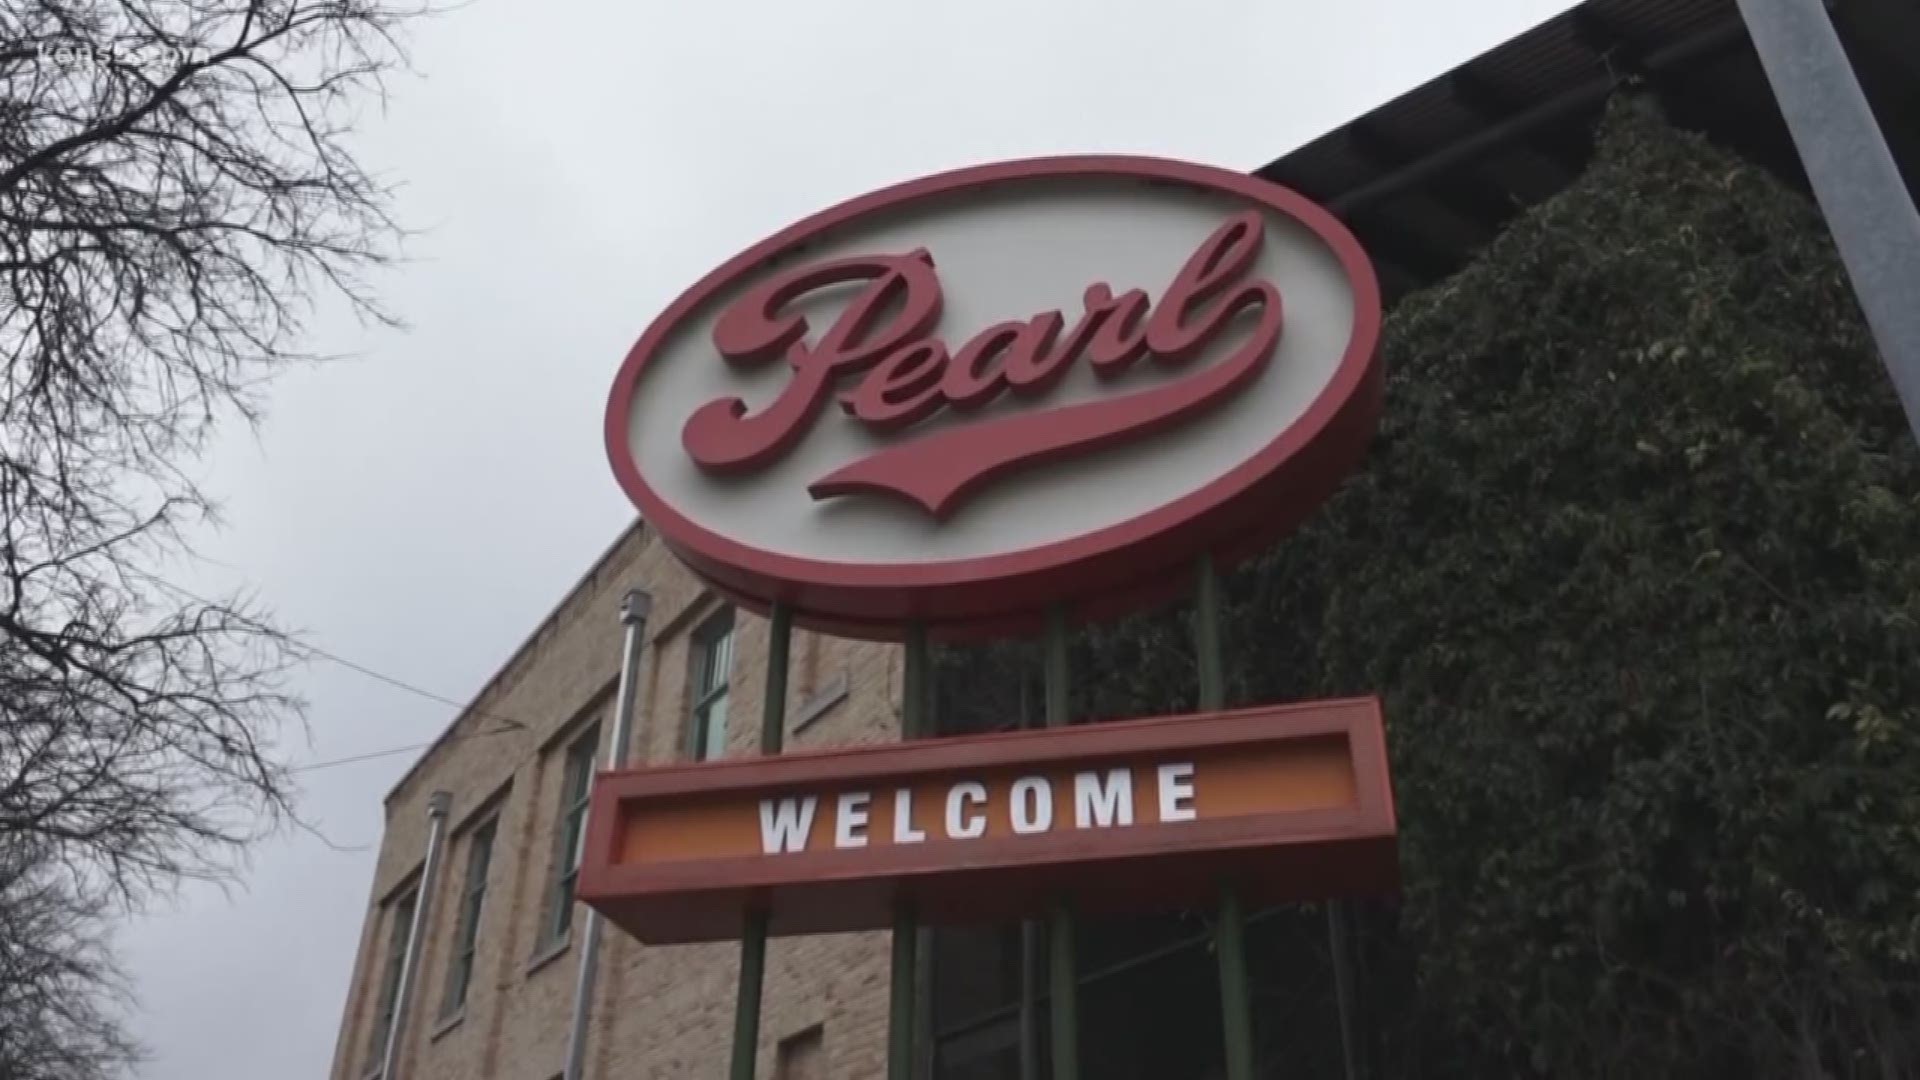 E-scooters are zipping all over downtown San Antonio. Eyewitness News reporter Jaleesa Irazarry explains what's behind the ban at the Pearl.